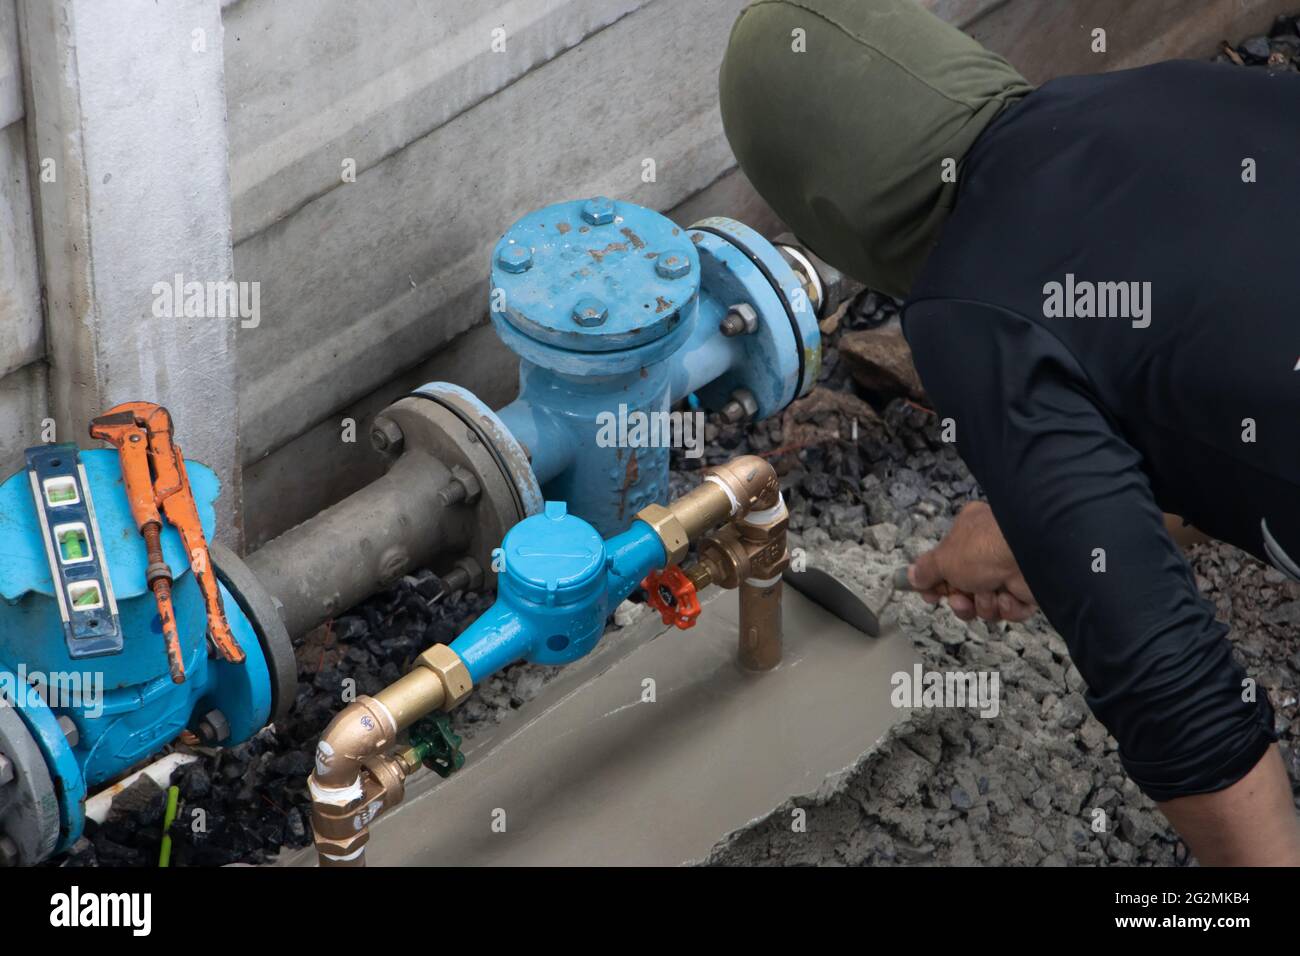 A plumber with balaclava works on an outdoor pipe for a condominium house Stock Photo